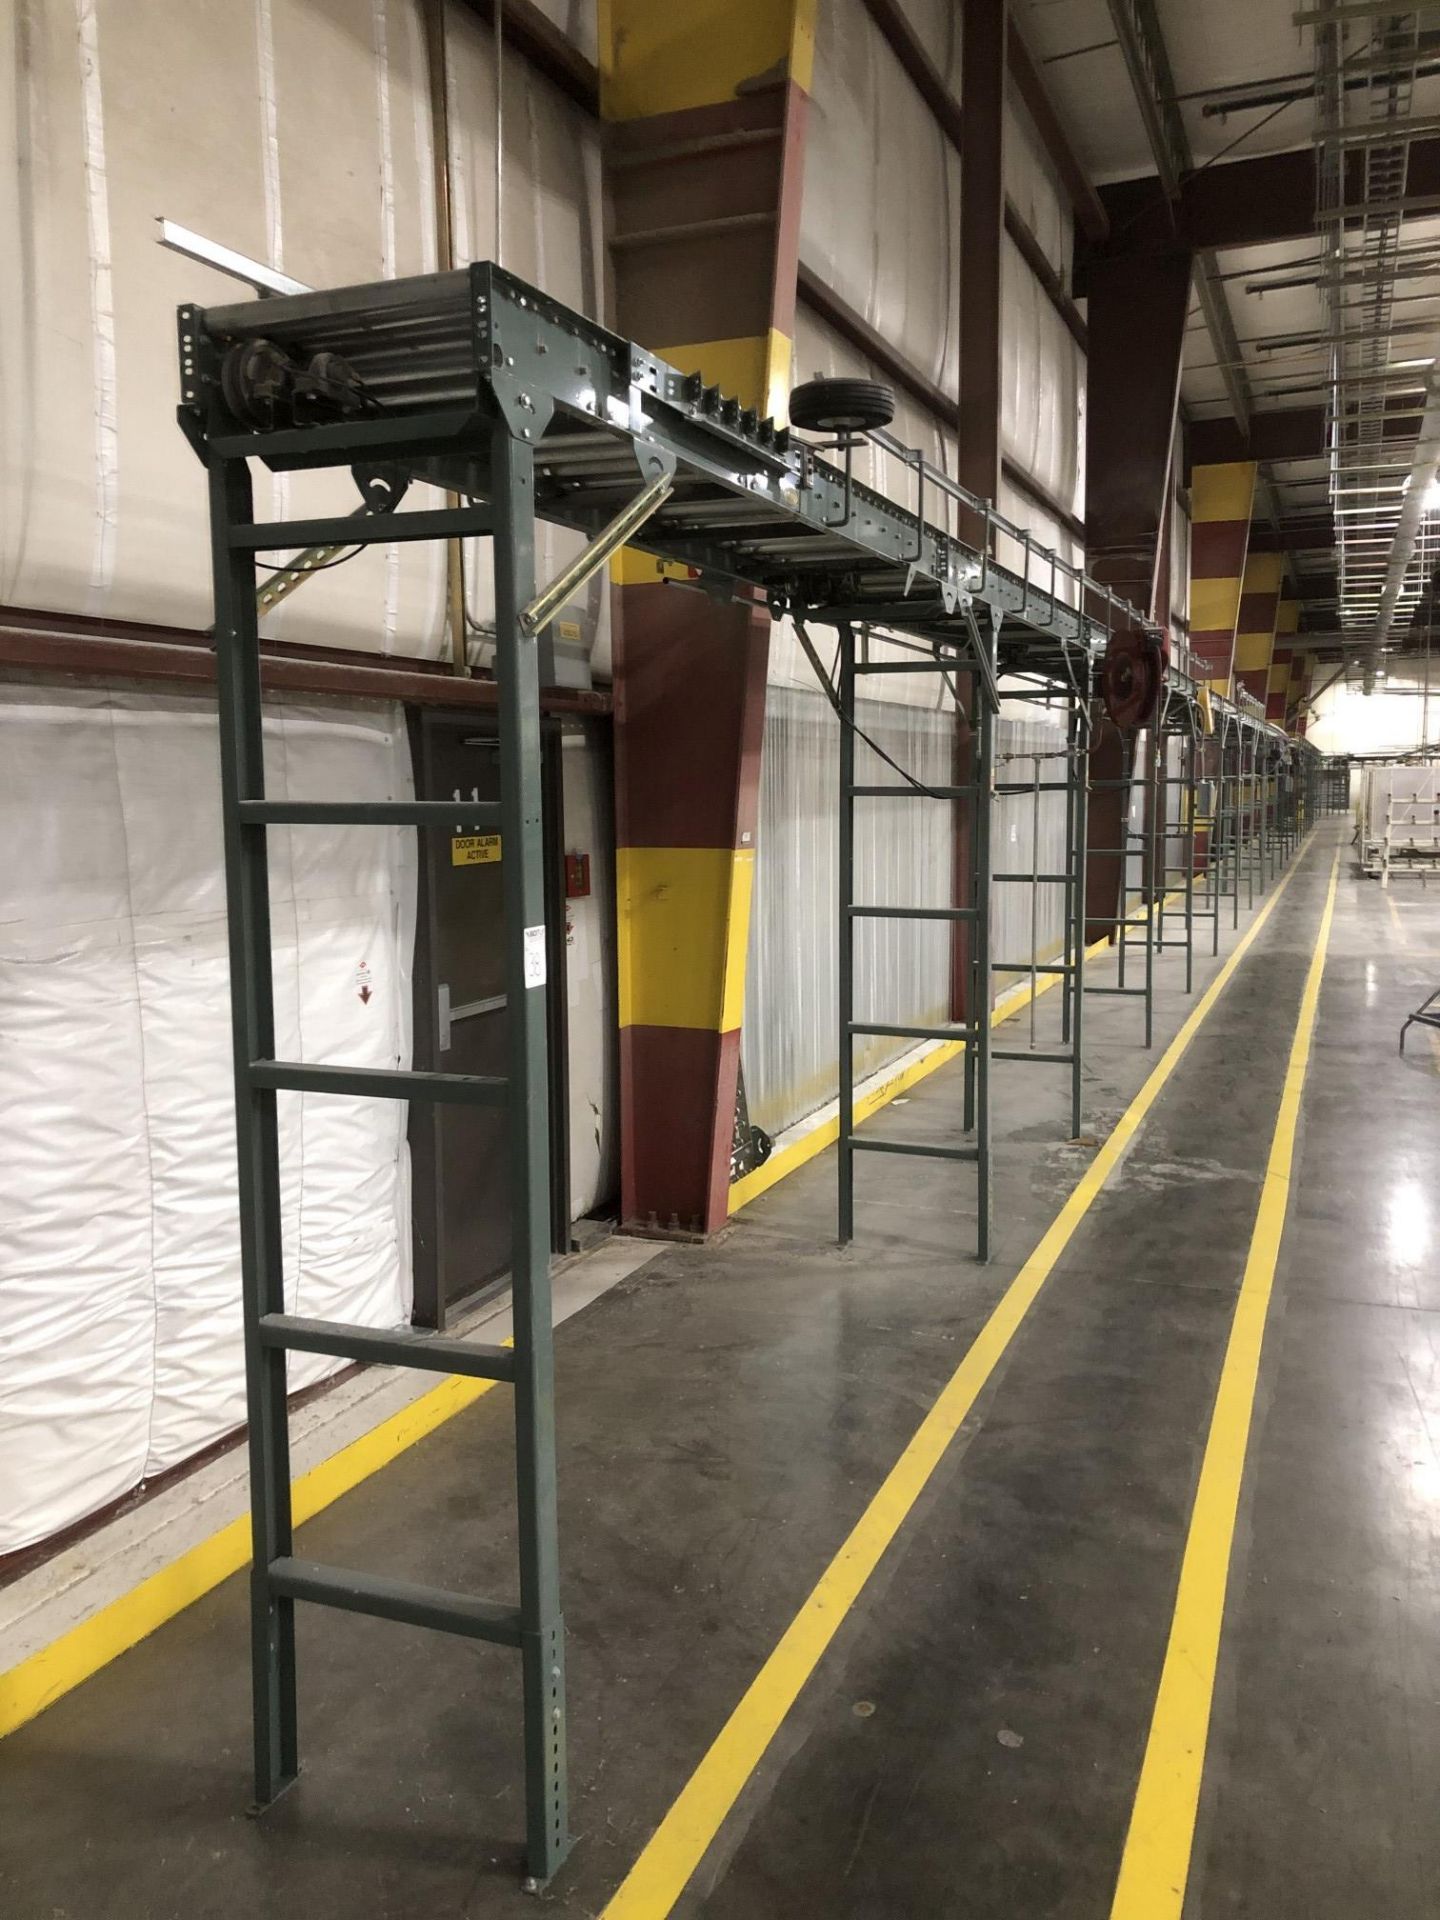 All Hytrol Conveyor Throughout Entire Site, Mostly 20" Wide Powered Roller Conveyor [Please - Image 12 of 80